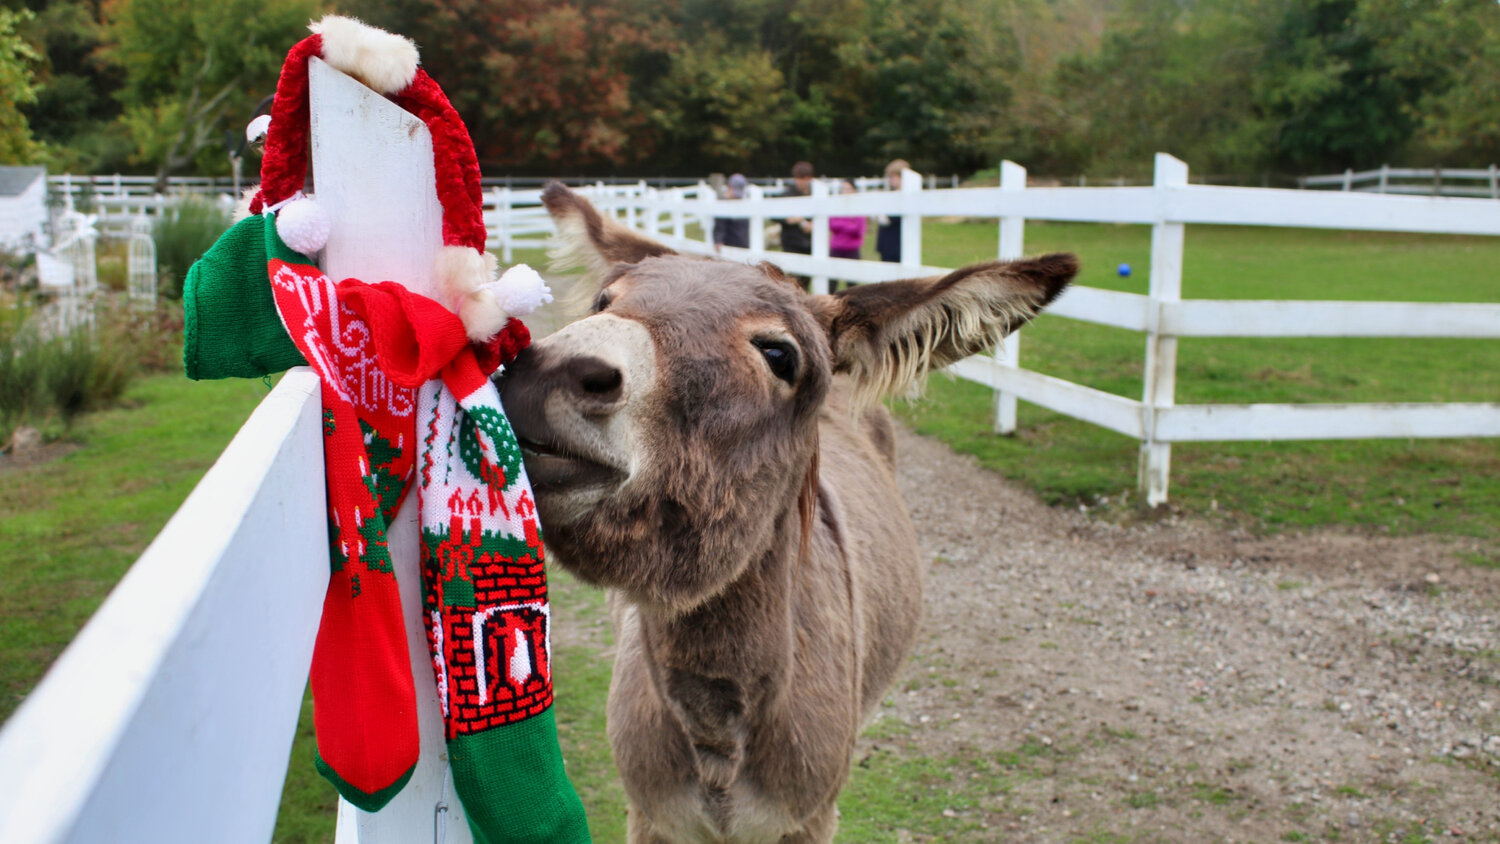 Stroll the grounds and meet the critters at West Place Animal Sanctuary for a holiday open house